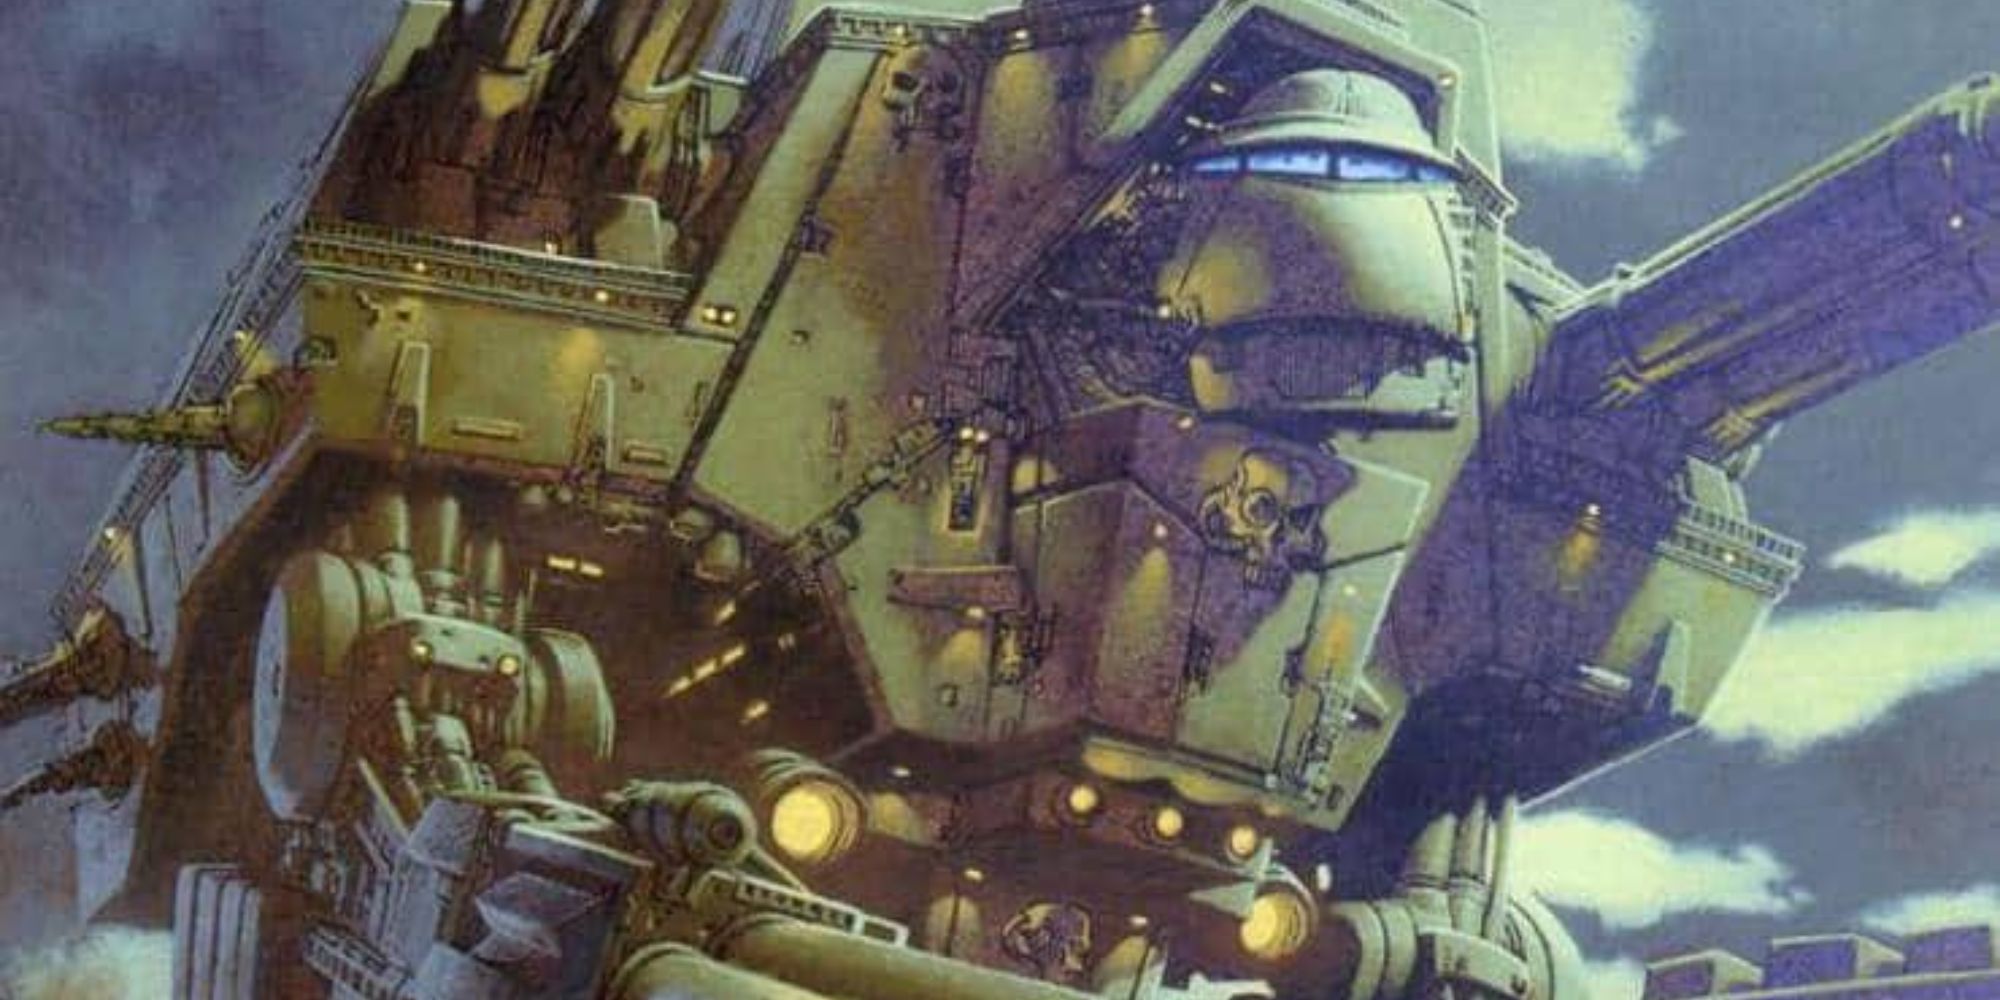 warhammer art showing head and shoulders of large titan mech